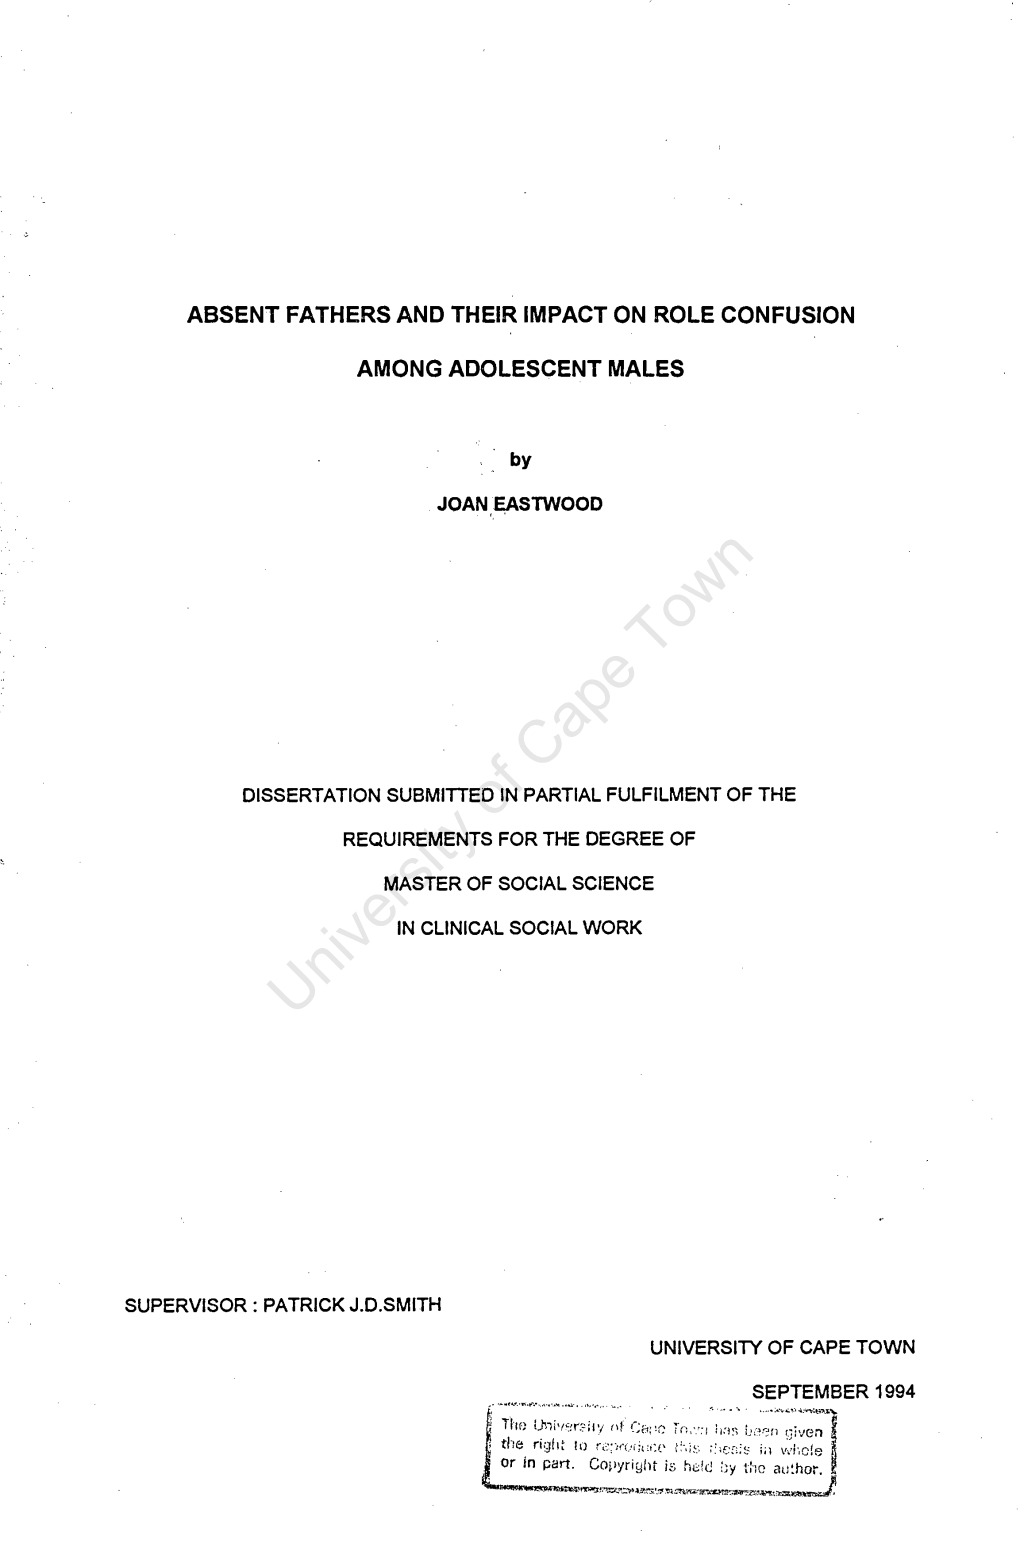 Absent Fathers and Their Impact on Role Confusion Among Adolescent Males